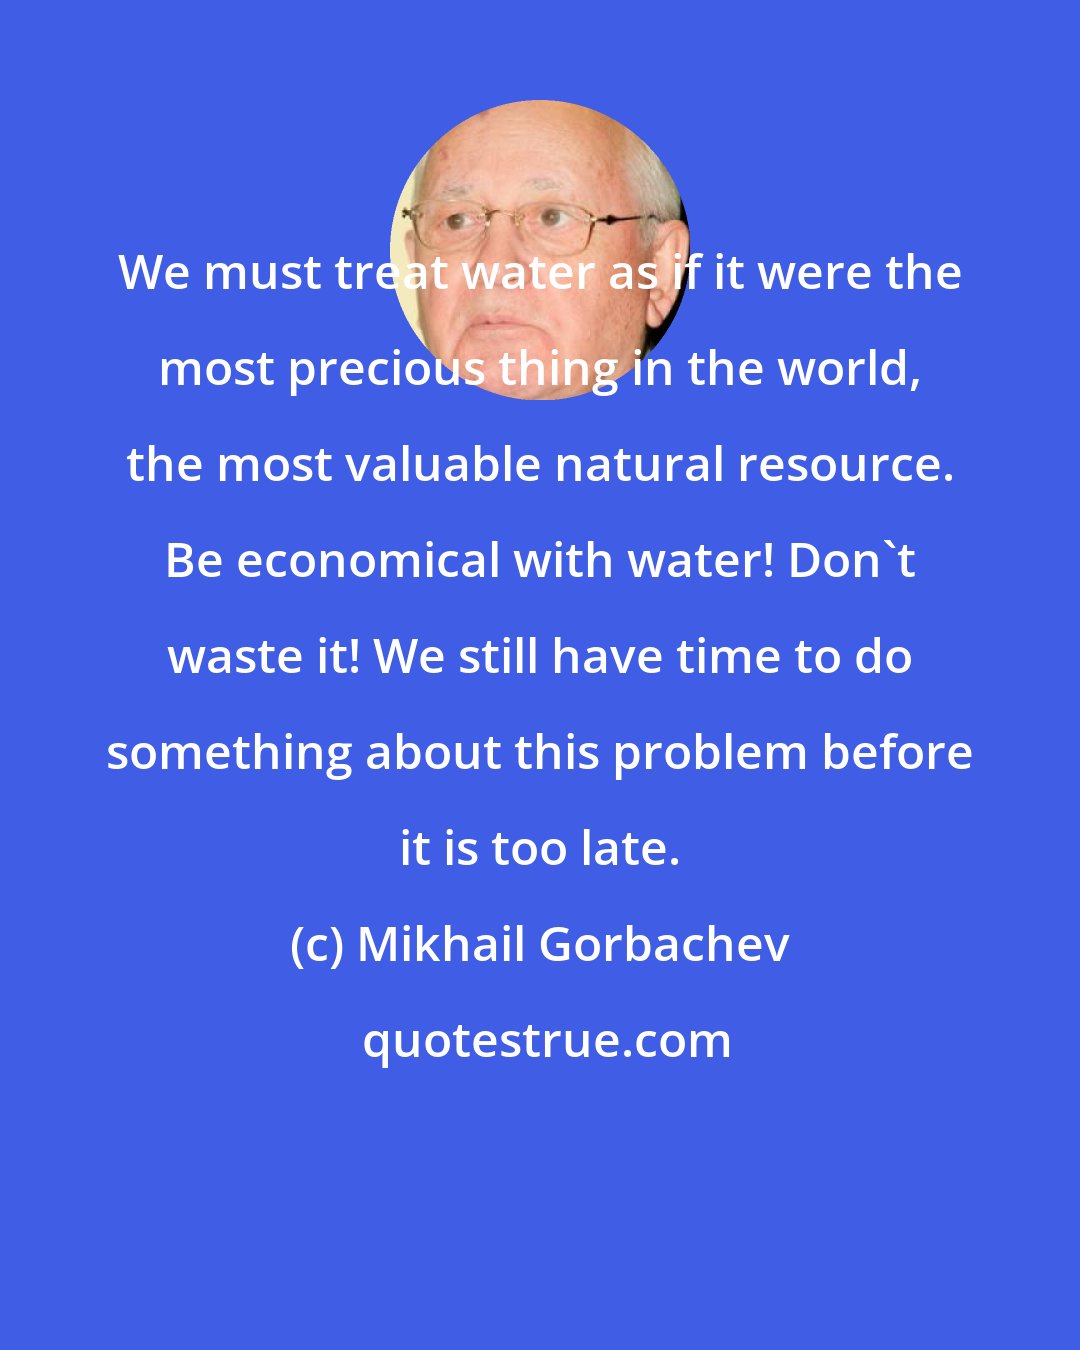 Mikhail Gorbachev: We must treat water as if it were the most precious thing in the world, the most valuable natural resource. Be economical with water! Don't waste it! We still have time to do something about this problem before it is too late.